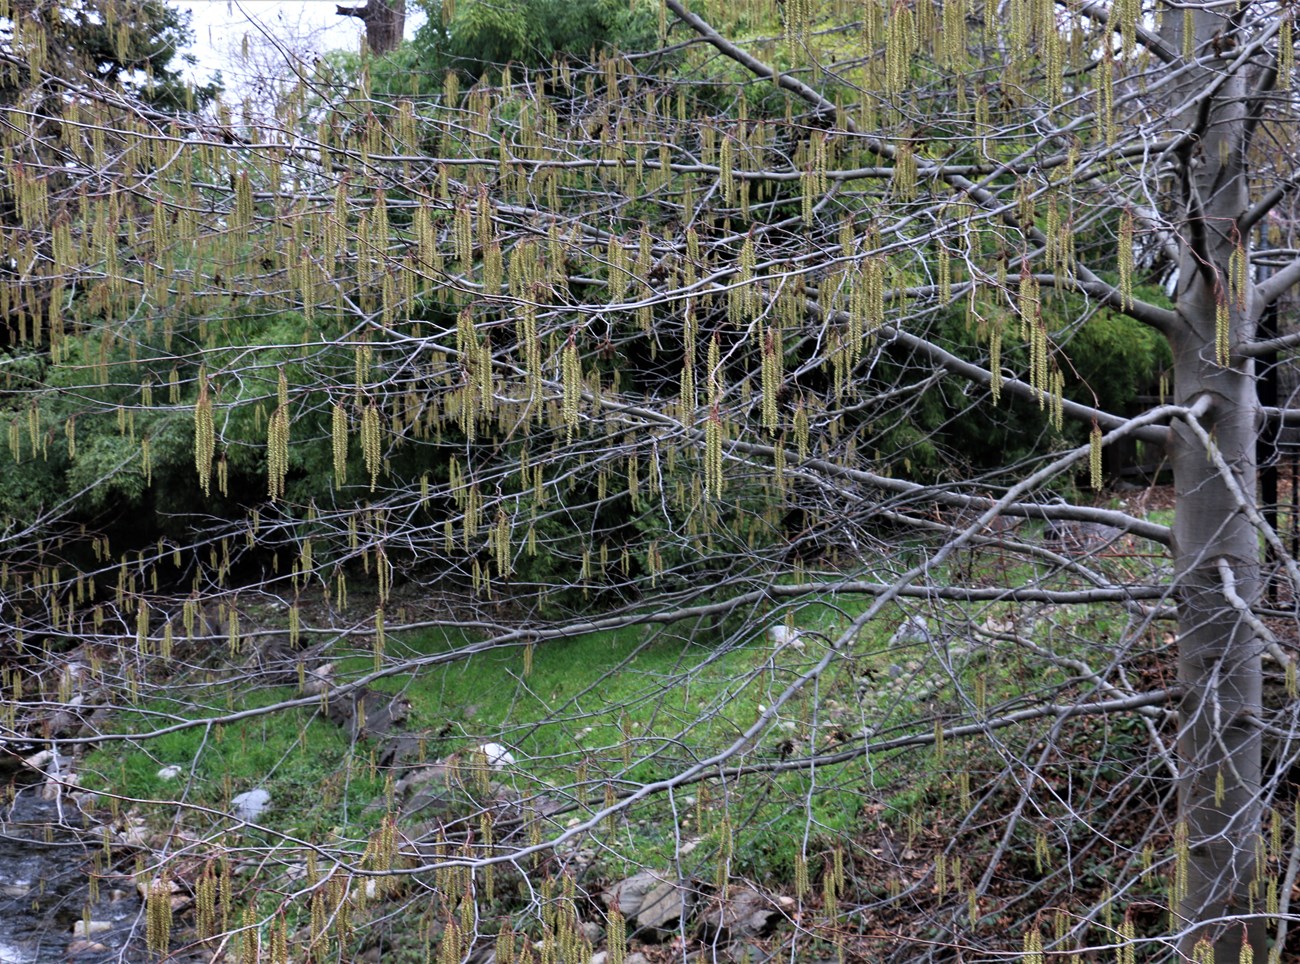 Multiple drooping, yellowish catkins draping a leafless tree.